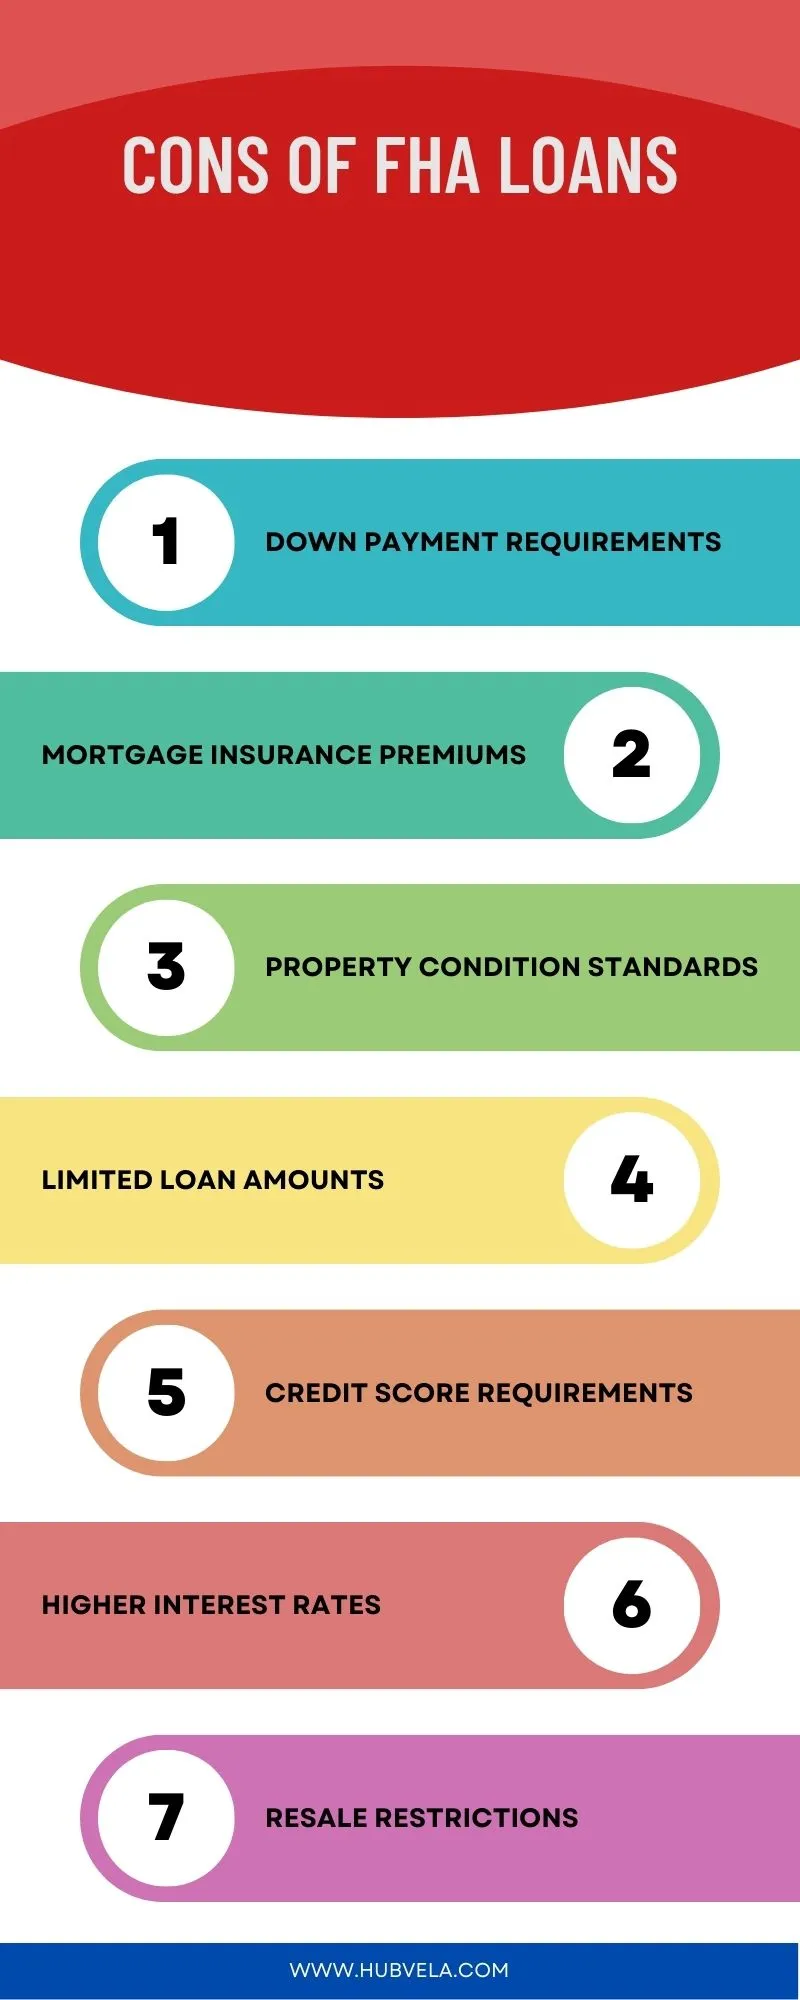 Cons Of FHA Loans Infographic